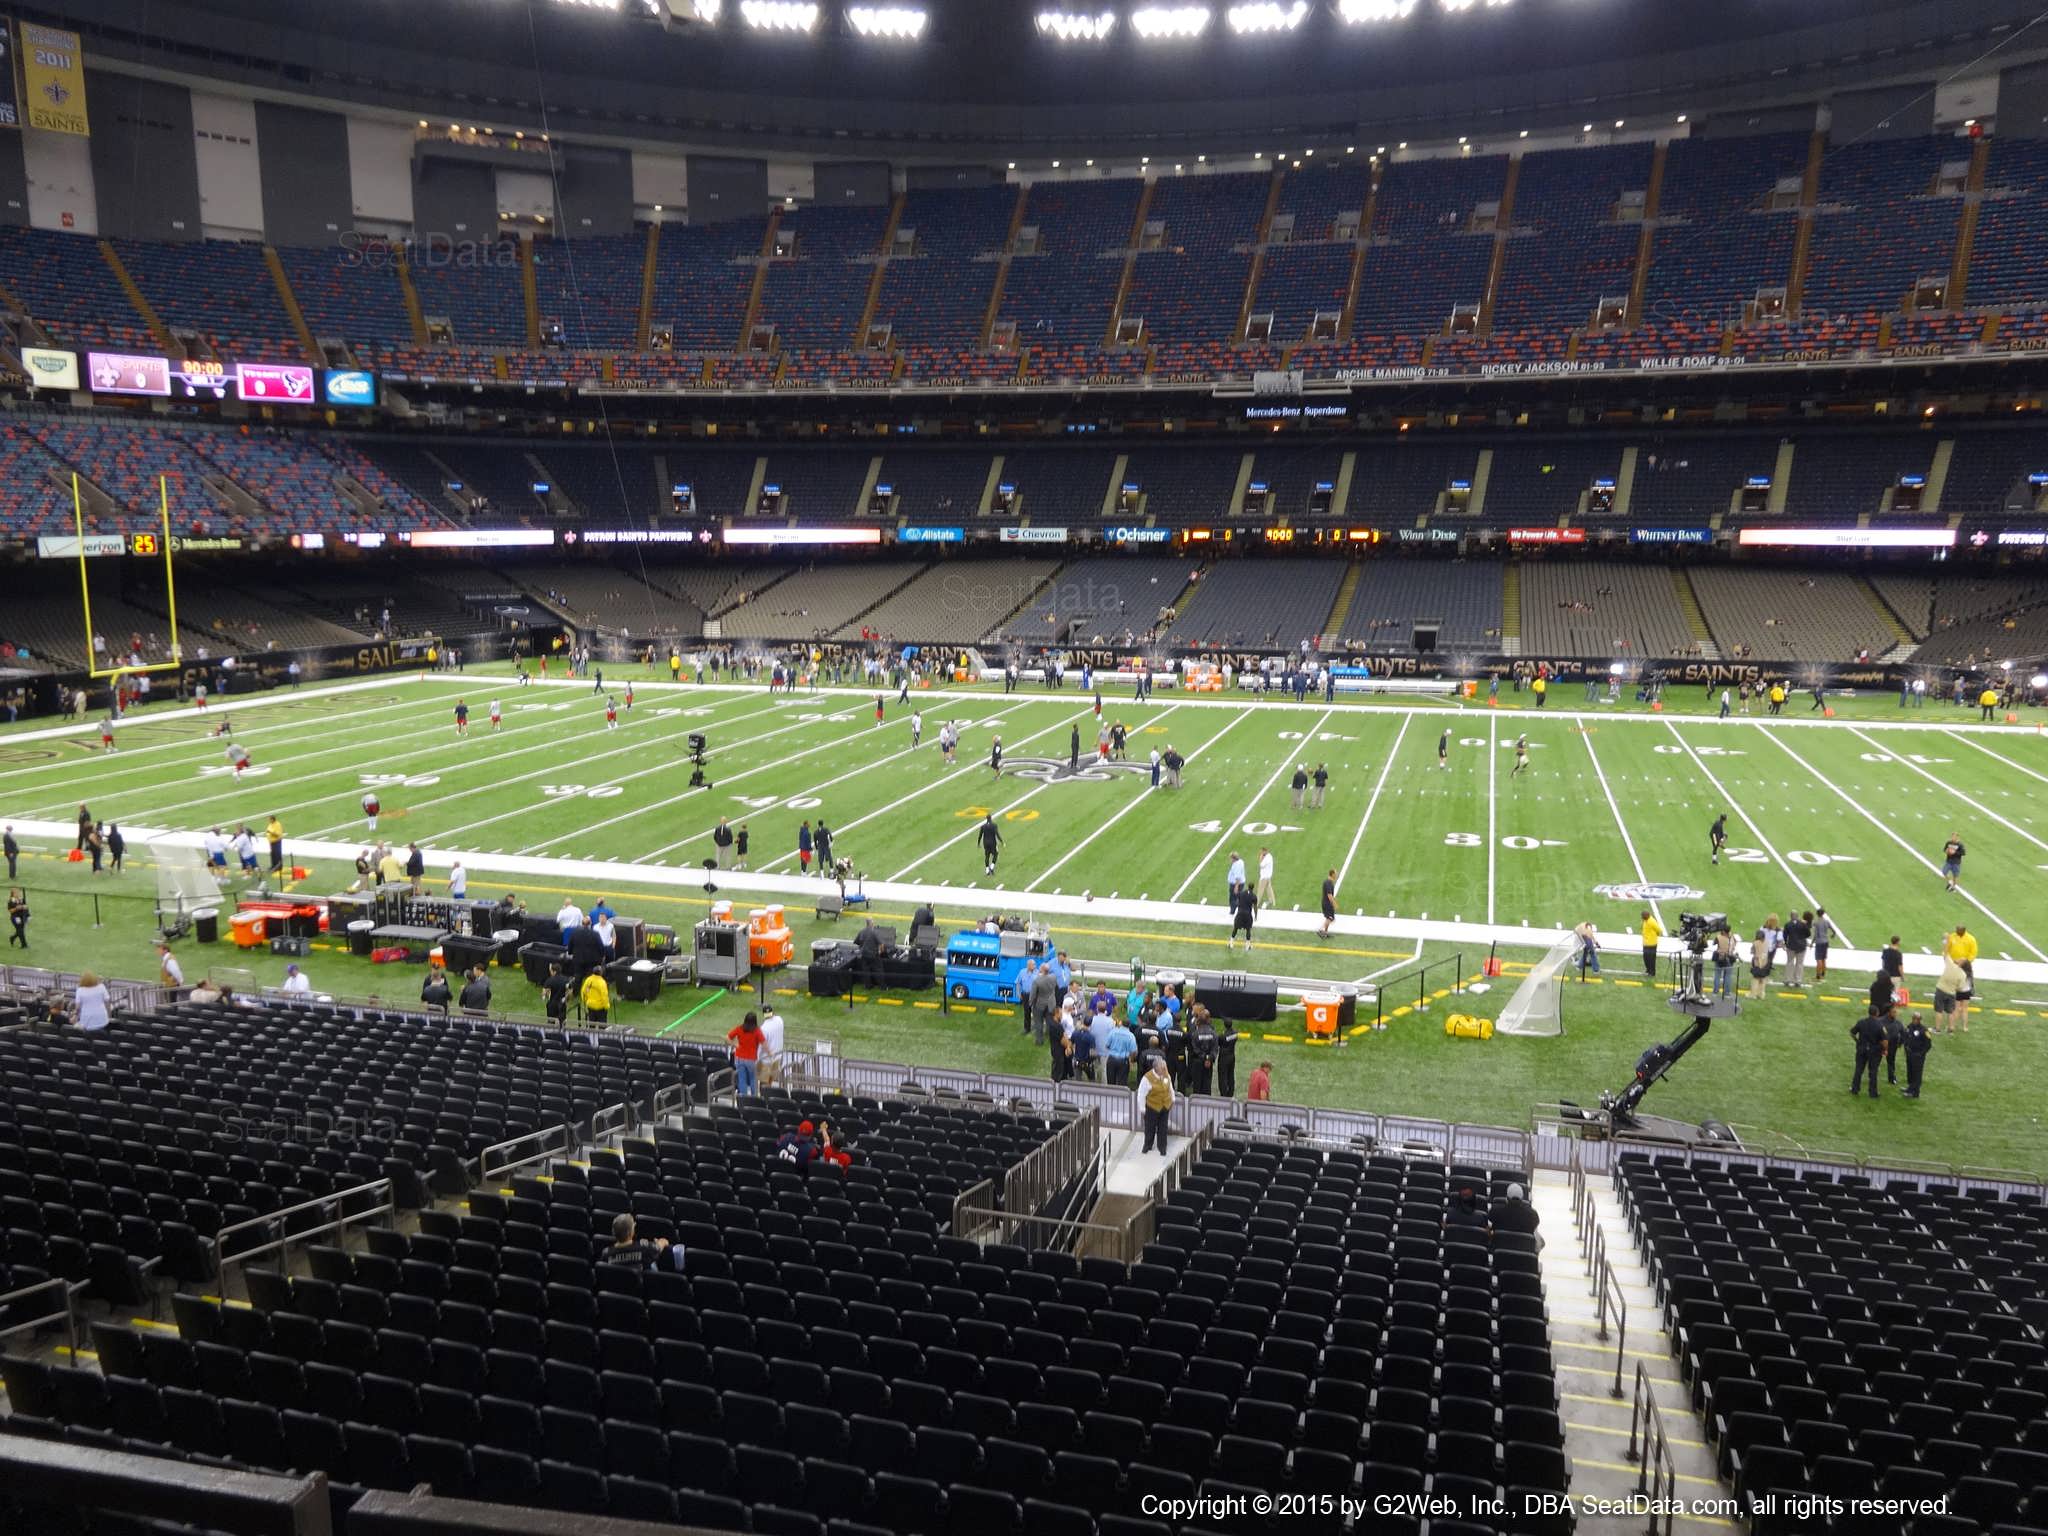 Seat view from section 261 at the Mercedes-Benz Superdome, home of the New Orleans Saints